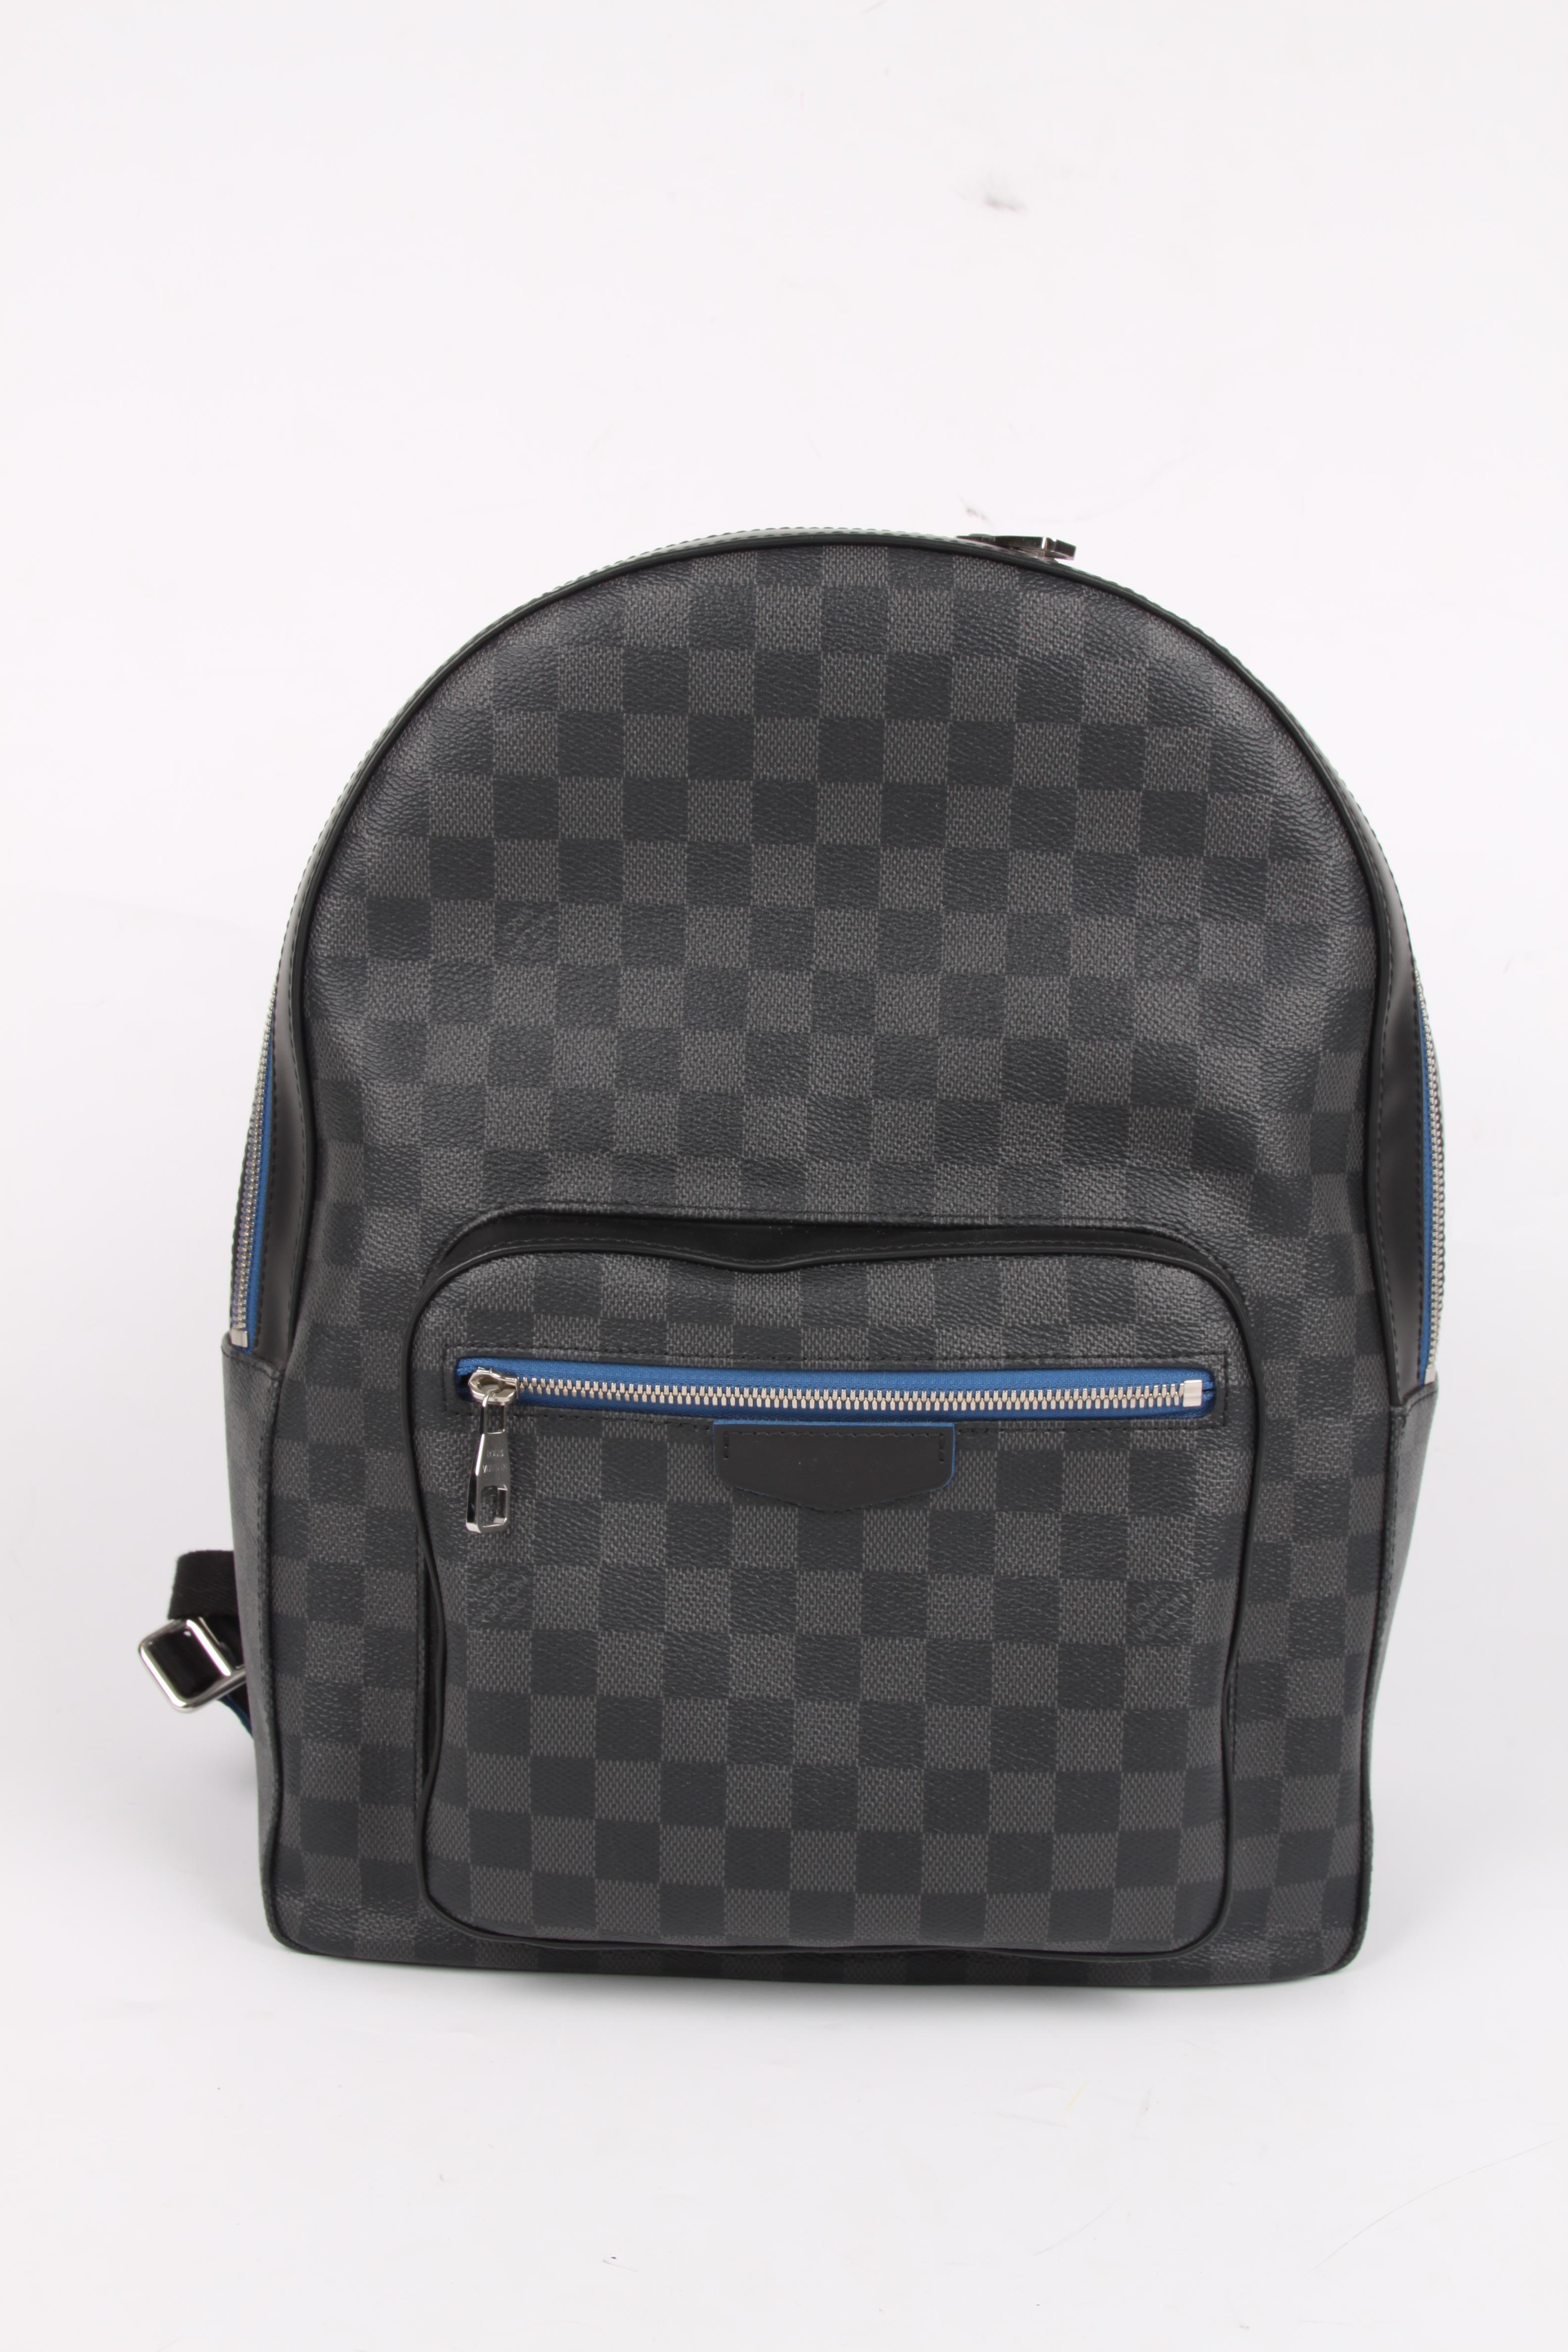 A stylish backpack by Louis Vuitton; this is the Josh Neon.

Crafted from signature Damier Check canvas, this time in grey with blue trim details. Silver-tone hardware, a zipped patch pocket at the front with a silver-tone lock. Adjustable black